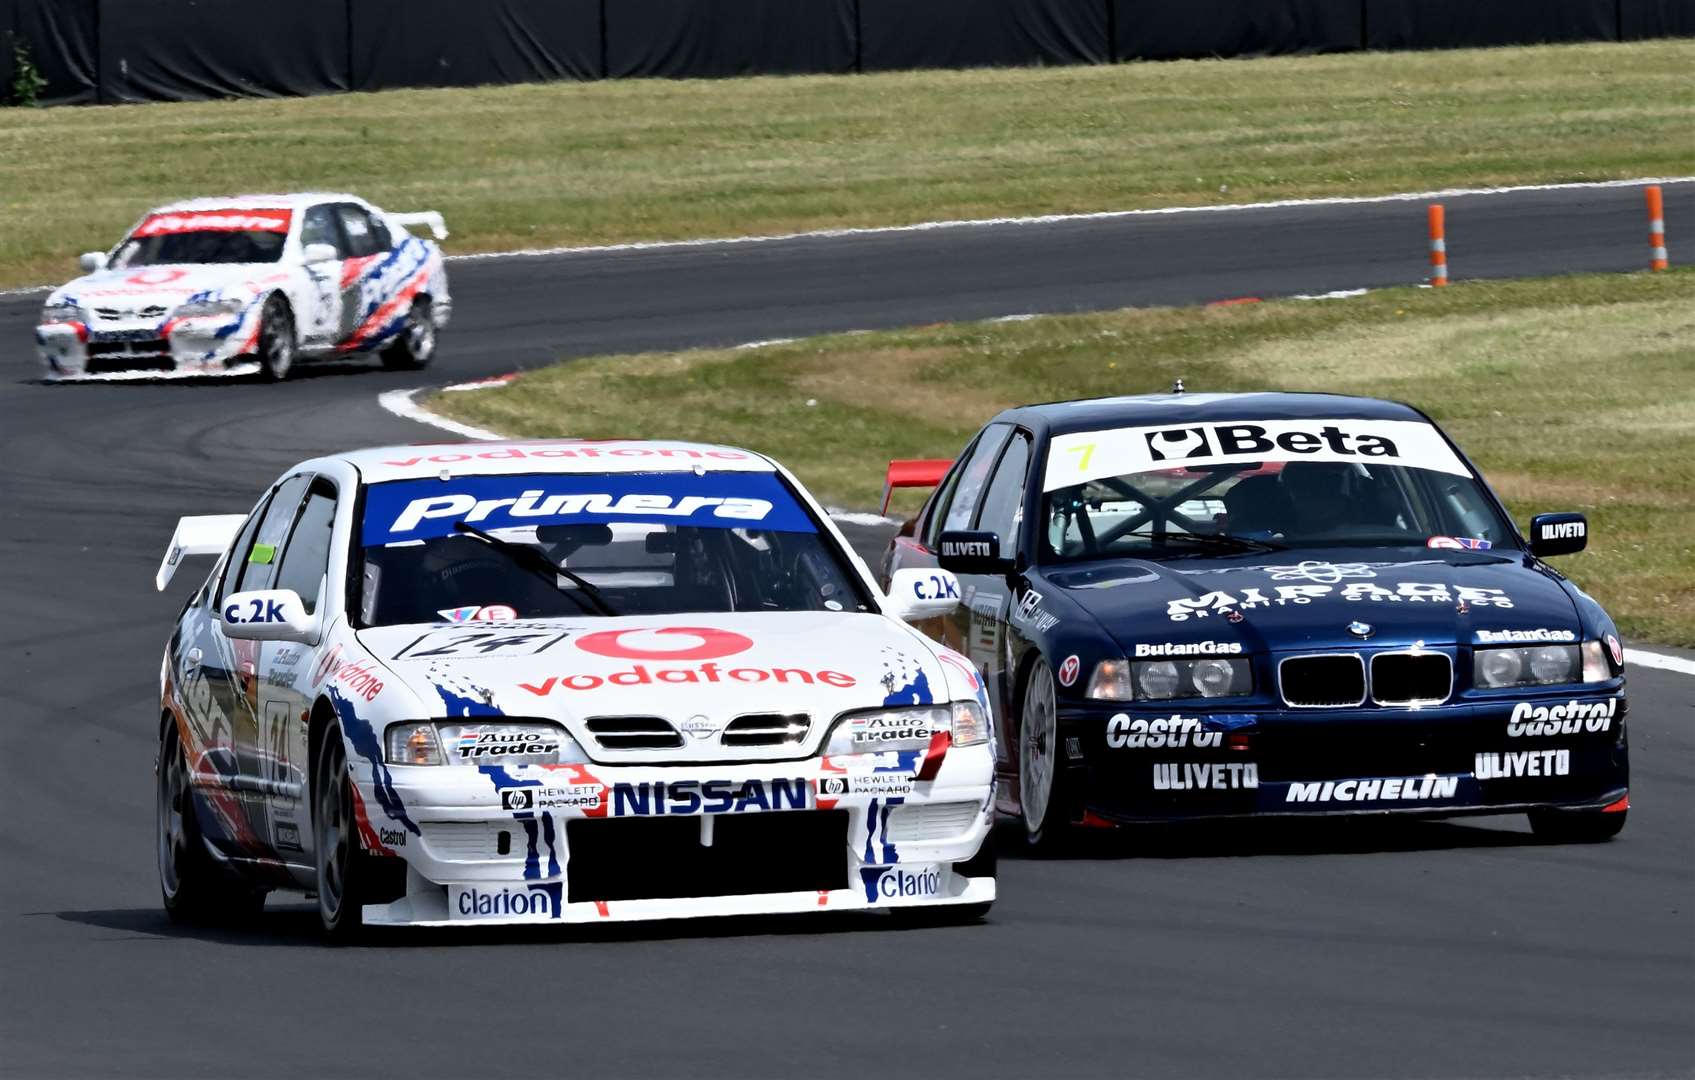 Hill, piloting the ex-Laurent Aiello Nissan Primera, enjoyed a close battle with tin-top favourite Steve Soper in the first Super Touring race on Saturday. Picture: Simon Hildrew